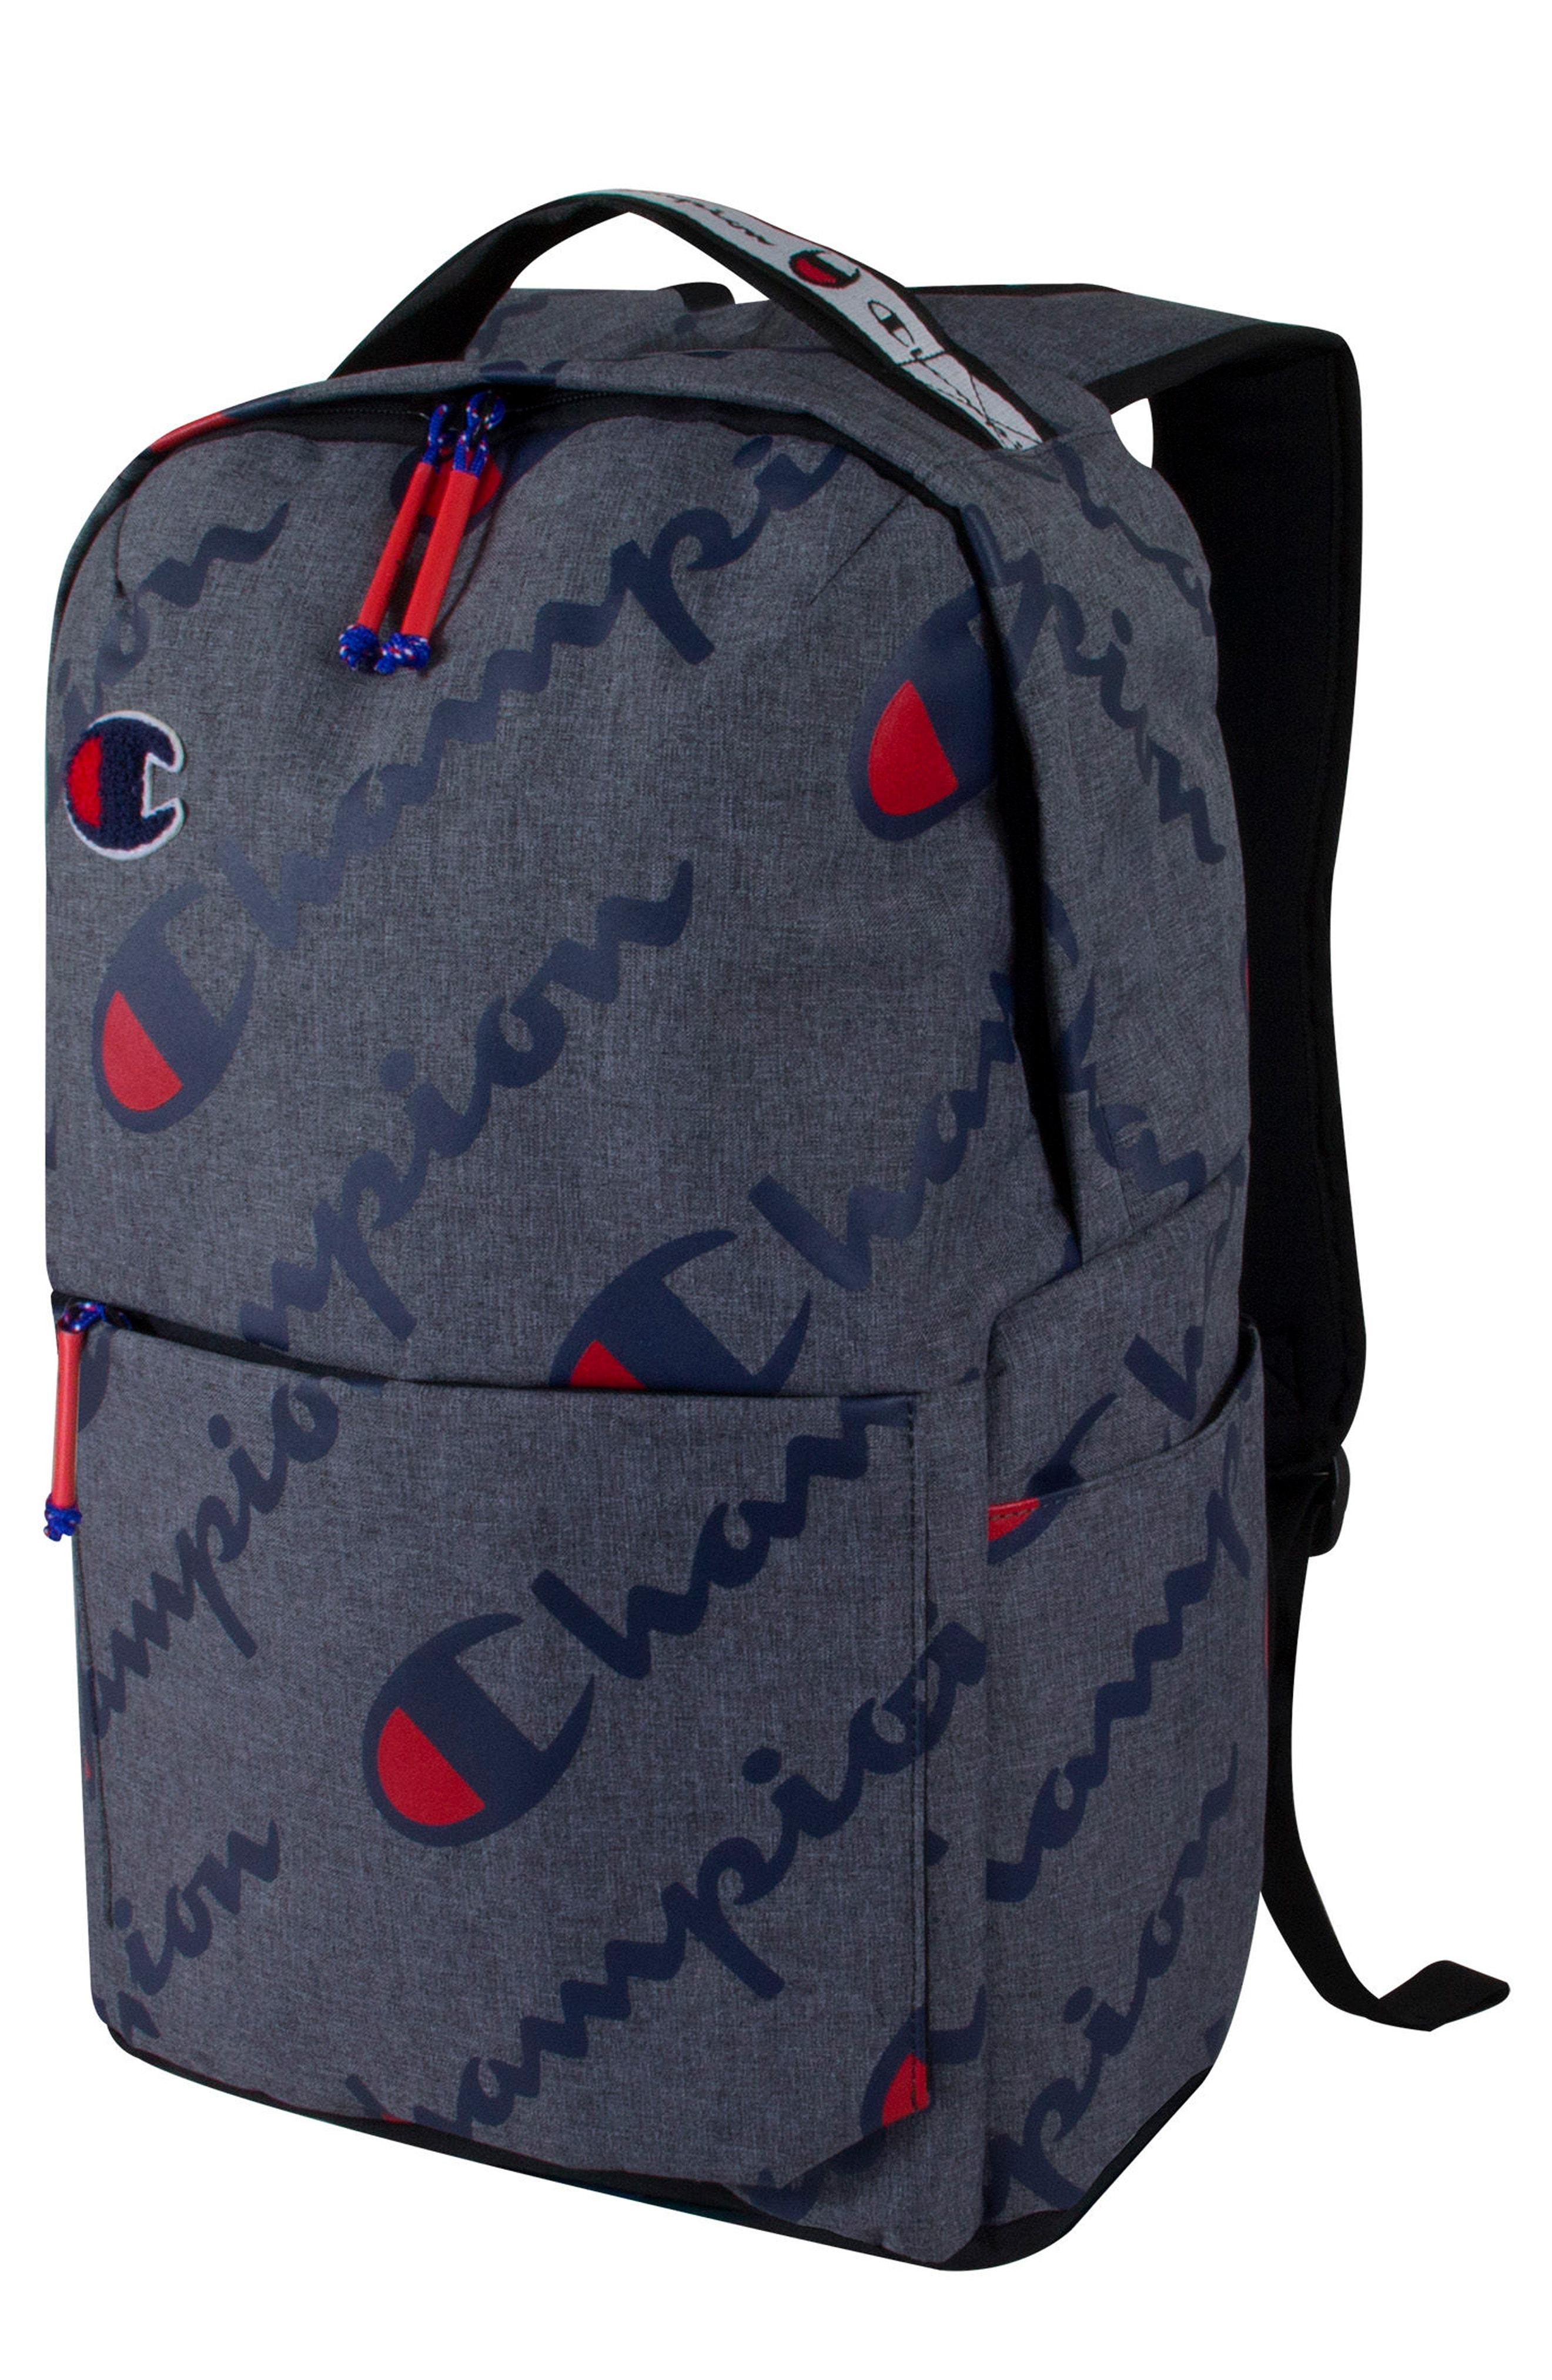 men's champion advocate backpack accessory